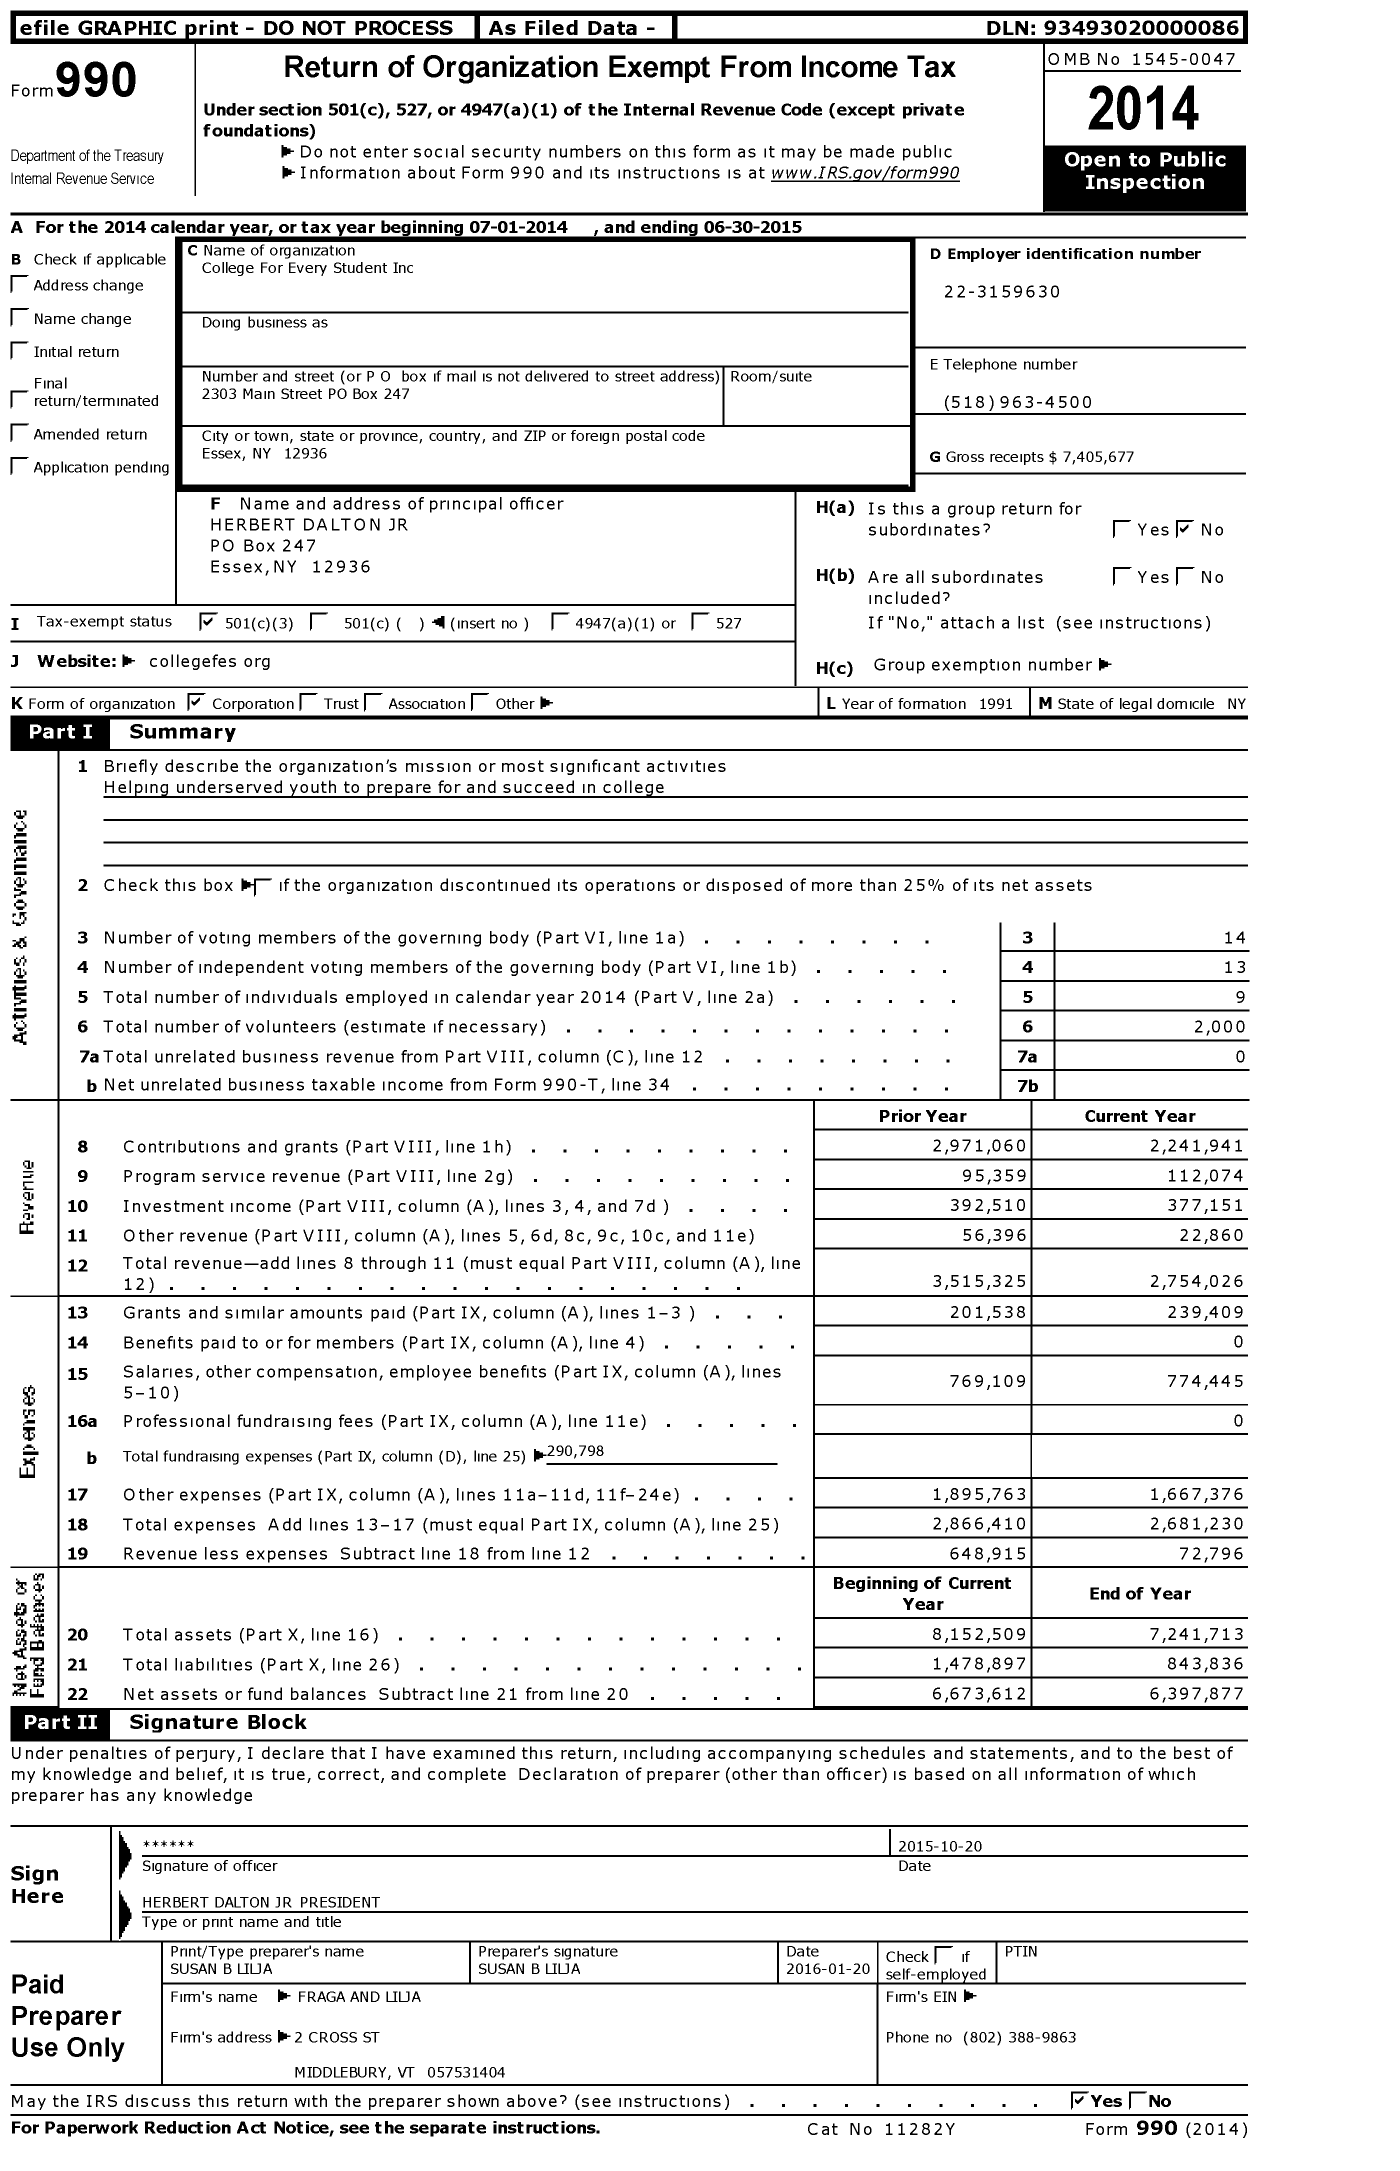 Image of first page of 2014 Form 990 for College for Every Student (CFES)